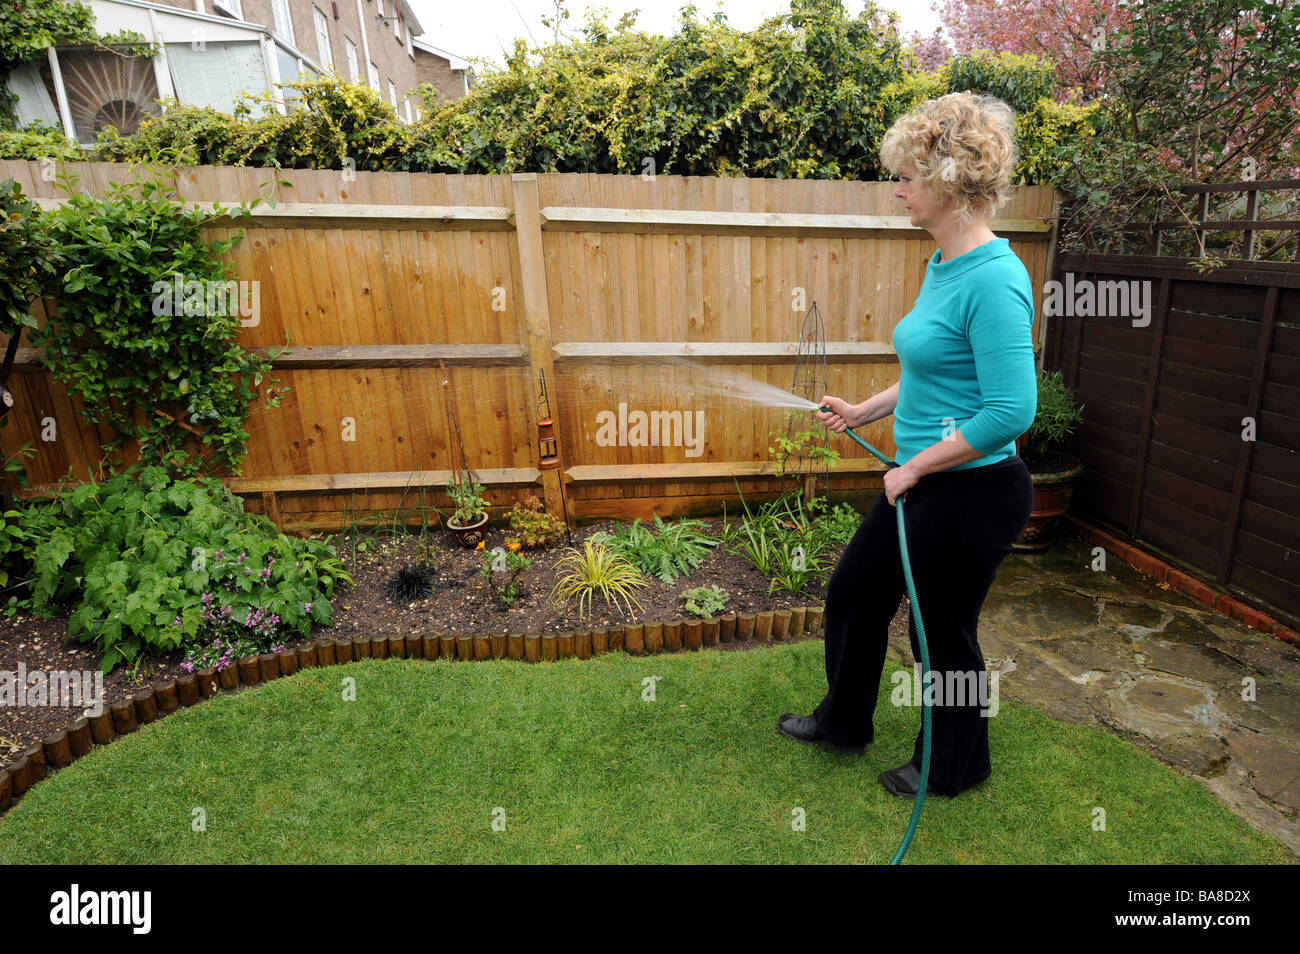 Blonde haired woman watering plants in her small town garden Stock Photo